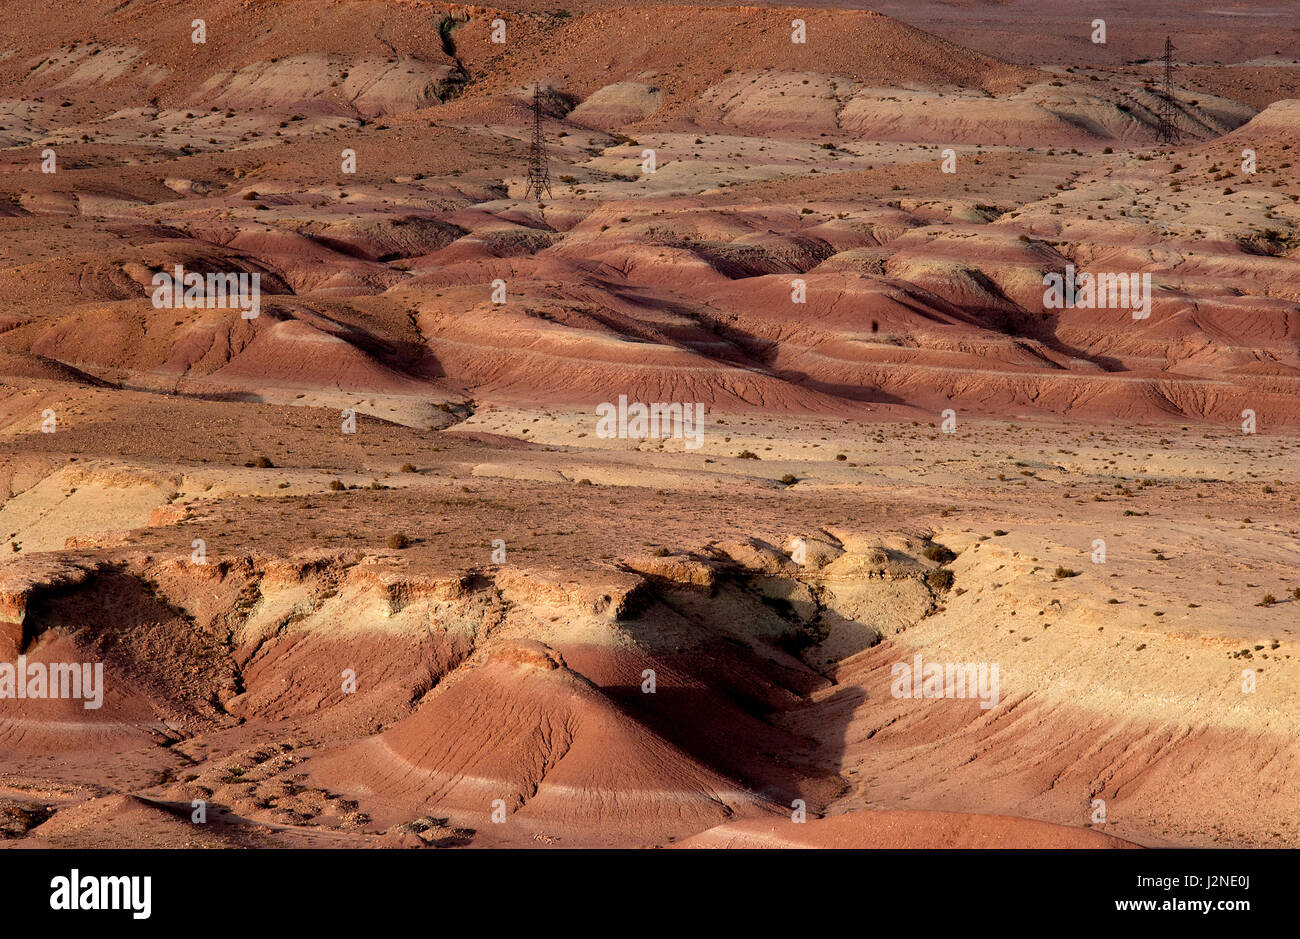 The arid desert landscape and striking geological formations of the Atlas Mountains in Morocco near the world heritage site of Ait Benhaddou. Stock Photo